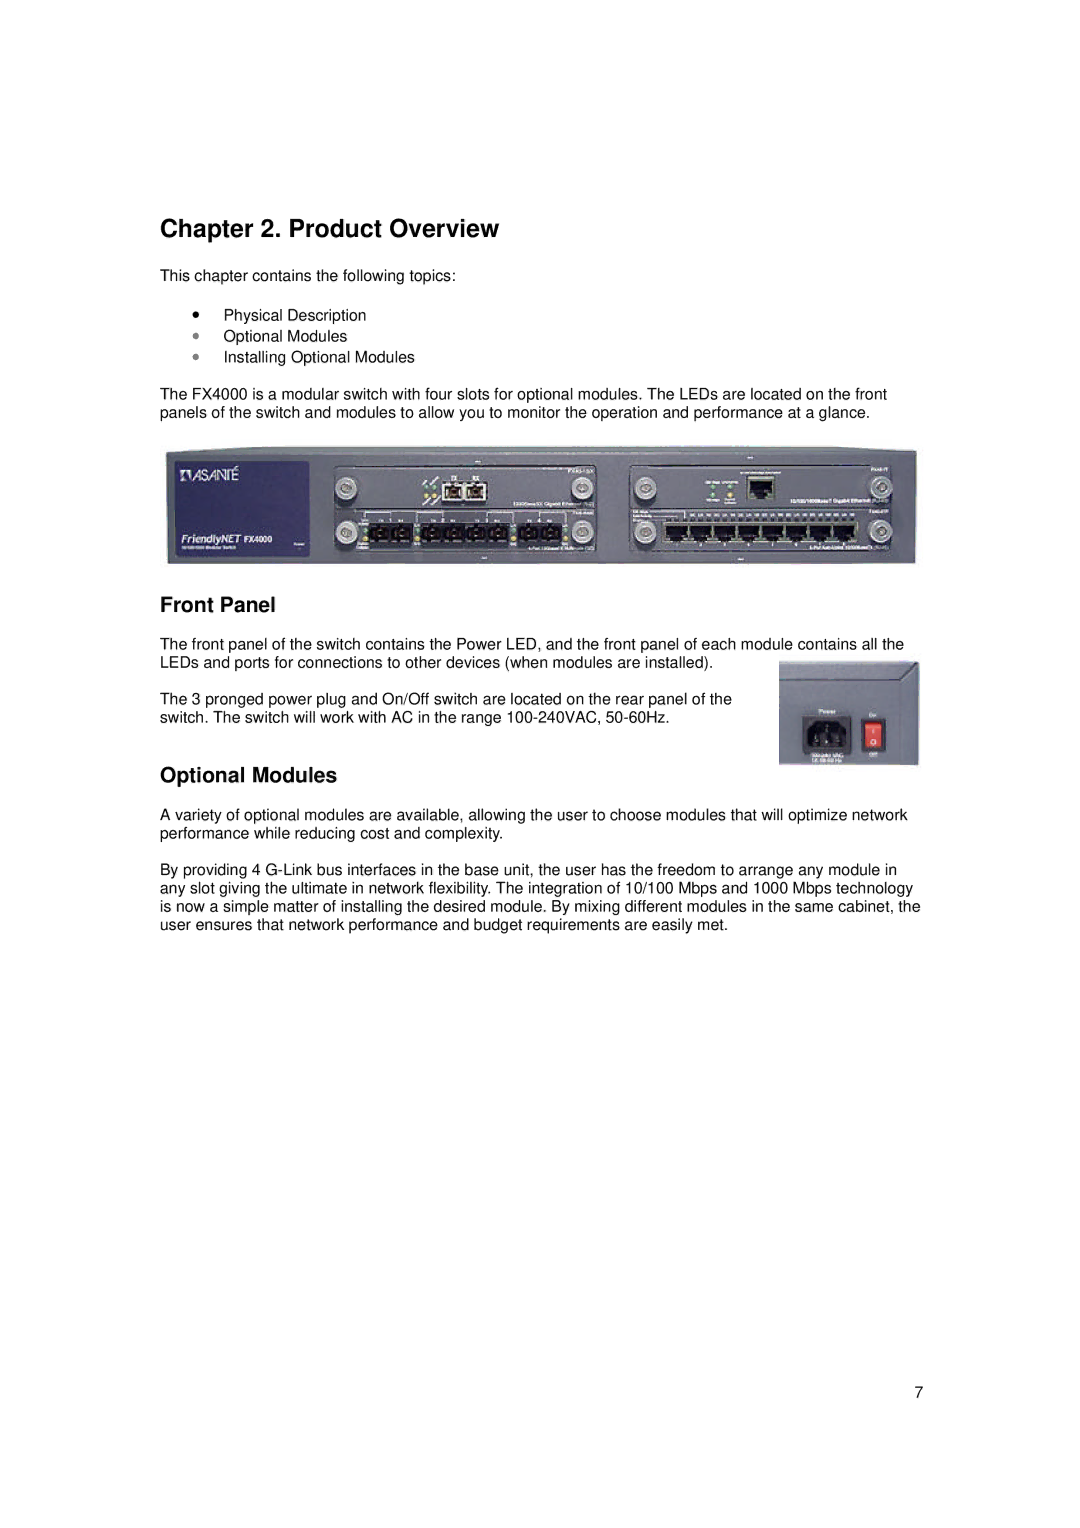 Asante Technologies FX4000 user manual Product Overview, Front Panel, Optional Modules 